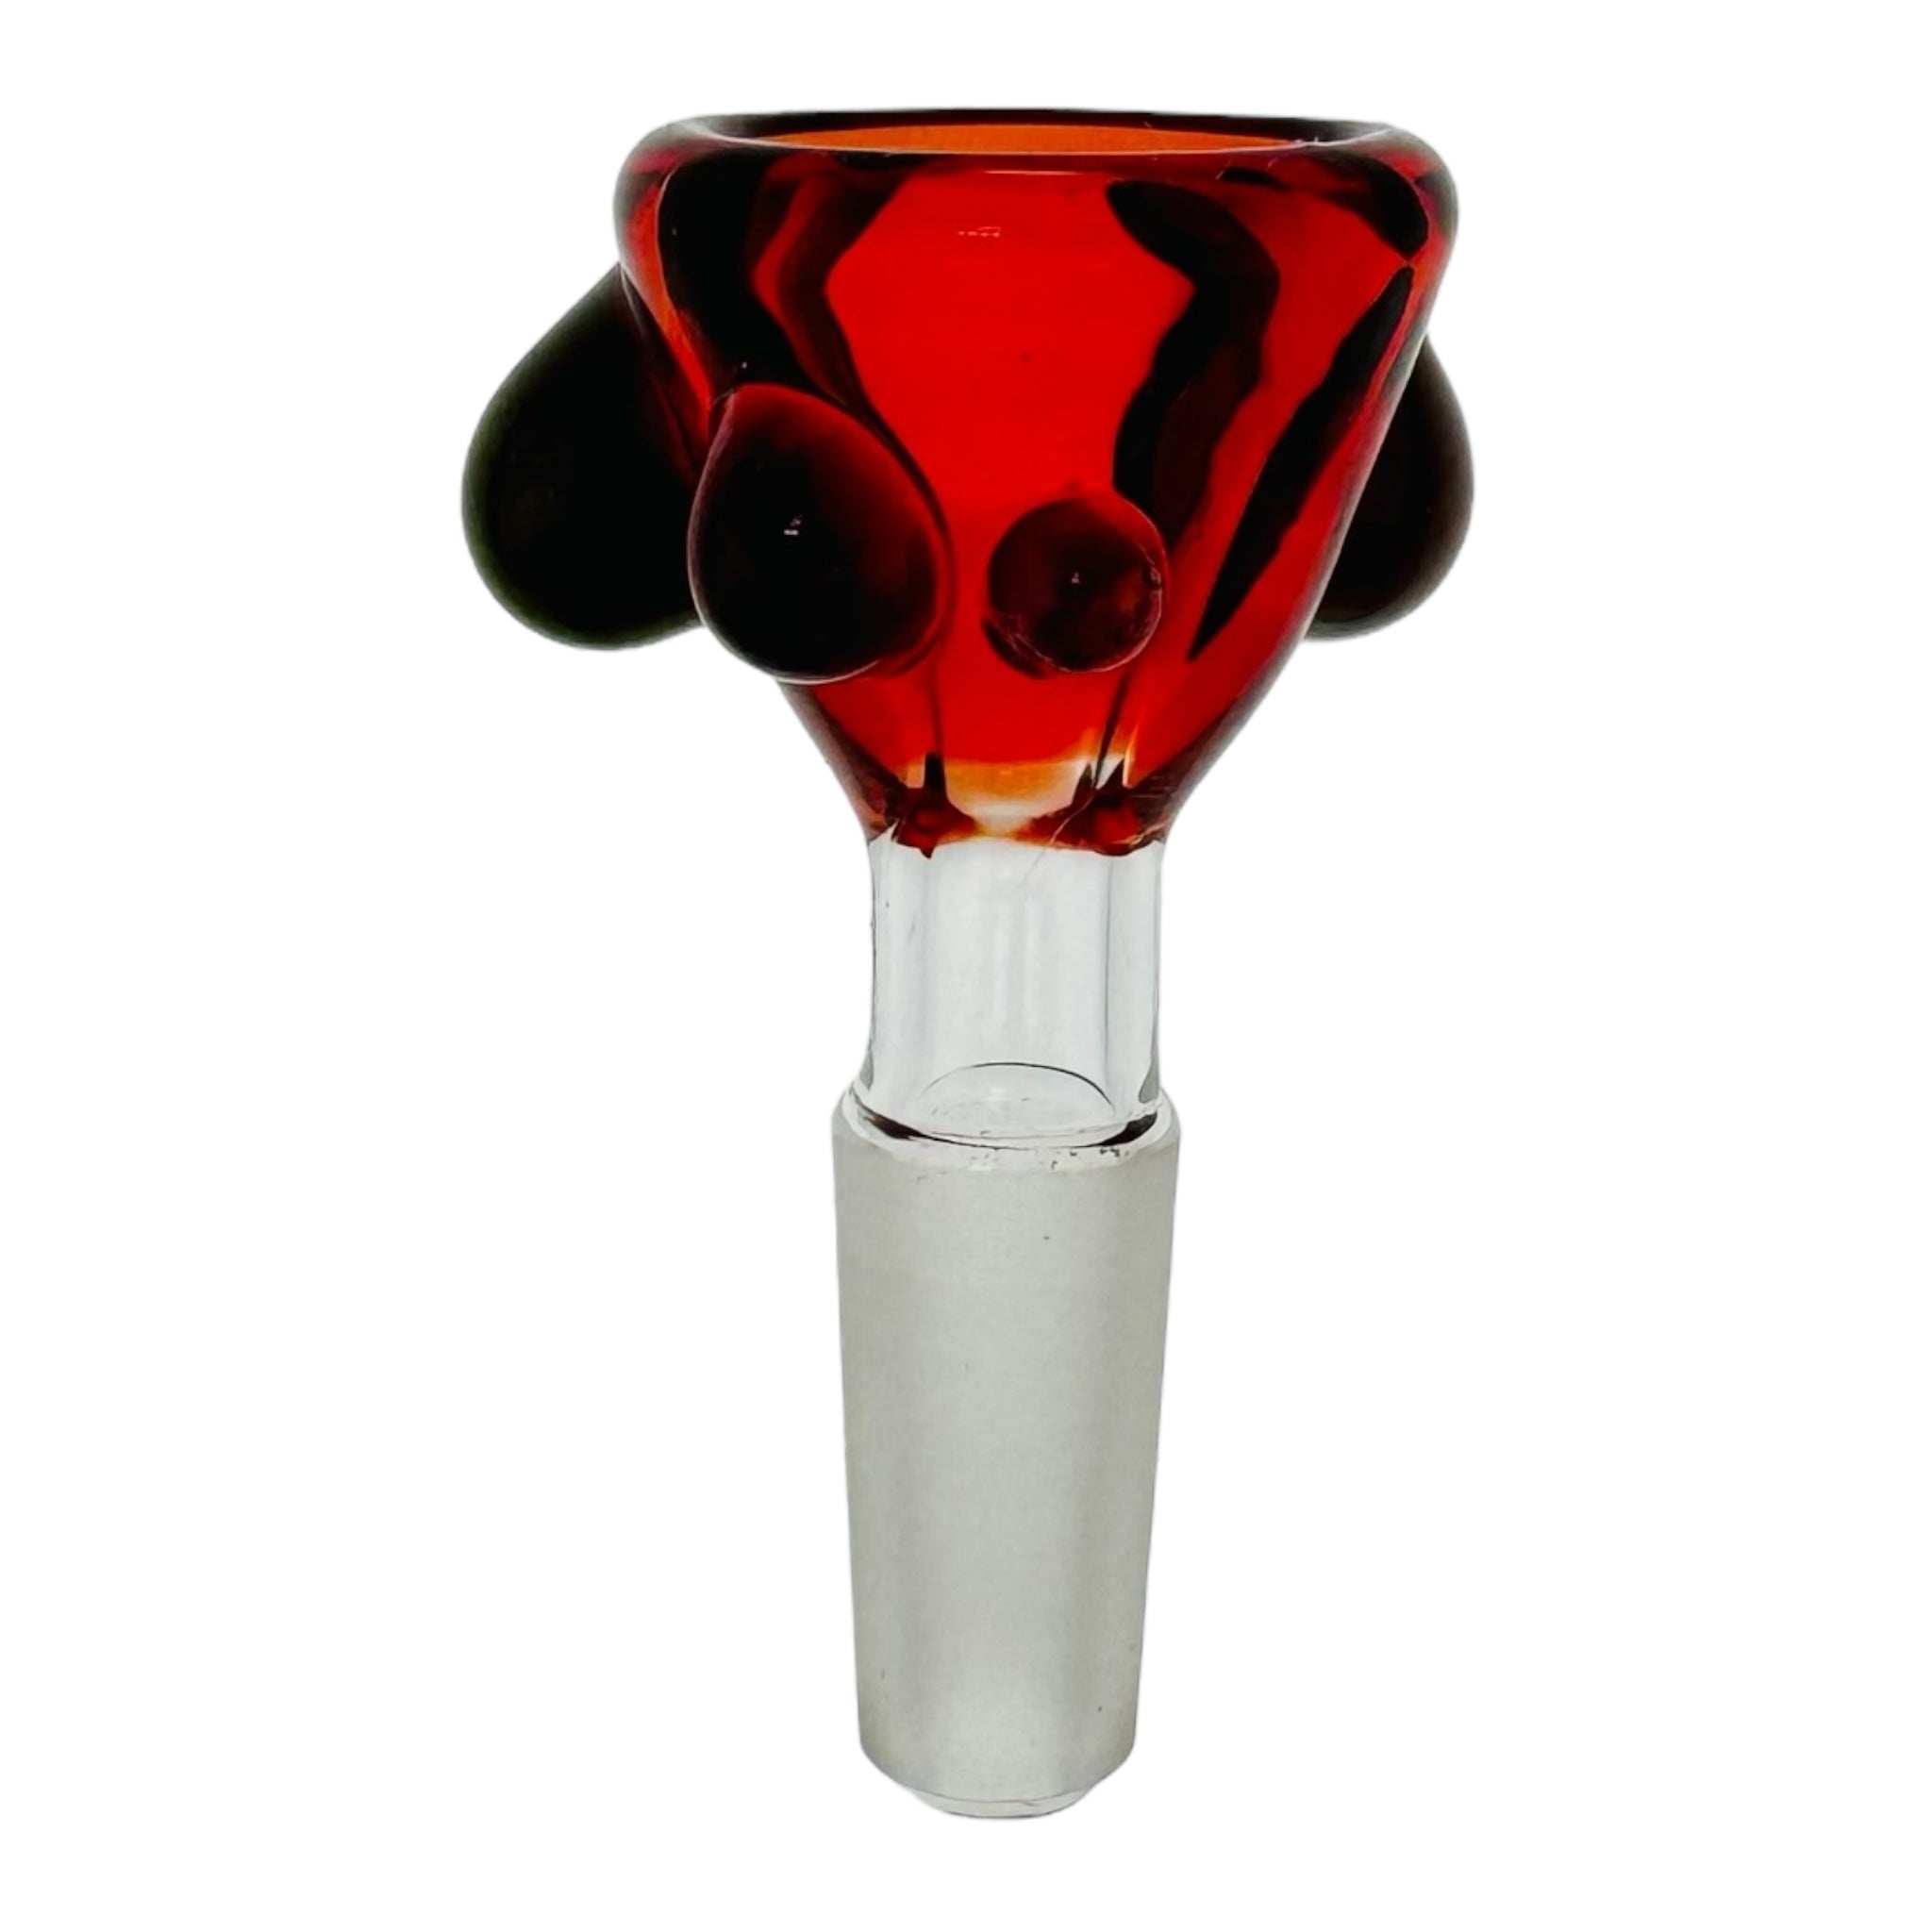 Arko Glass 10mm Flower Bowl Red Bowl With Alientech Dots